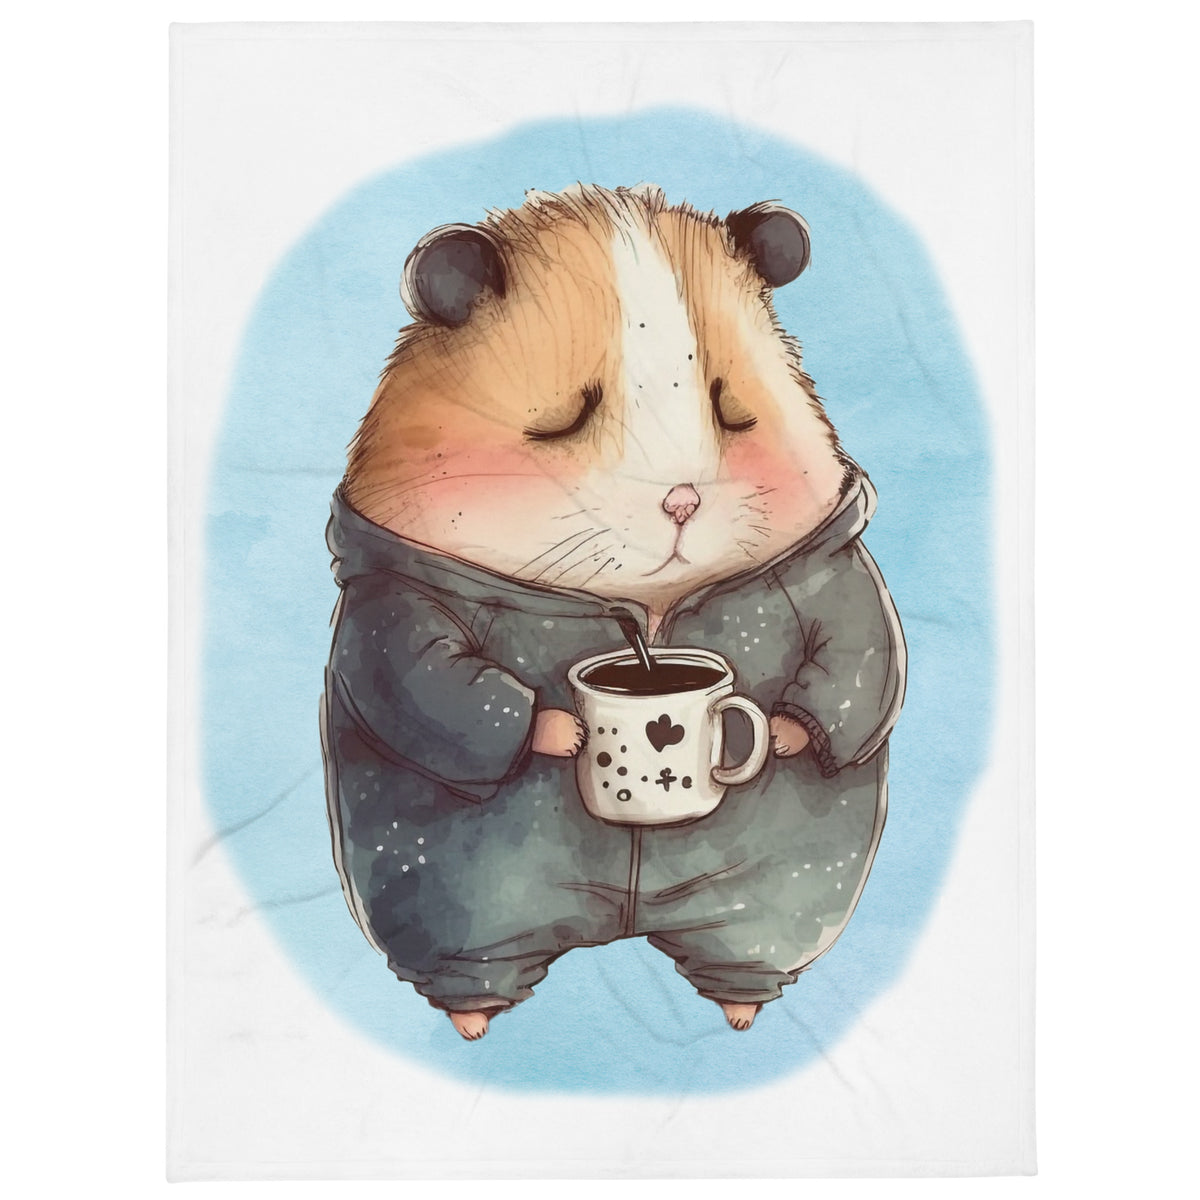 Sleepy Hamster 100% Polyester Soft Silk Touch Fabric Throw Blanket - Cozy, Durable and Adorable